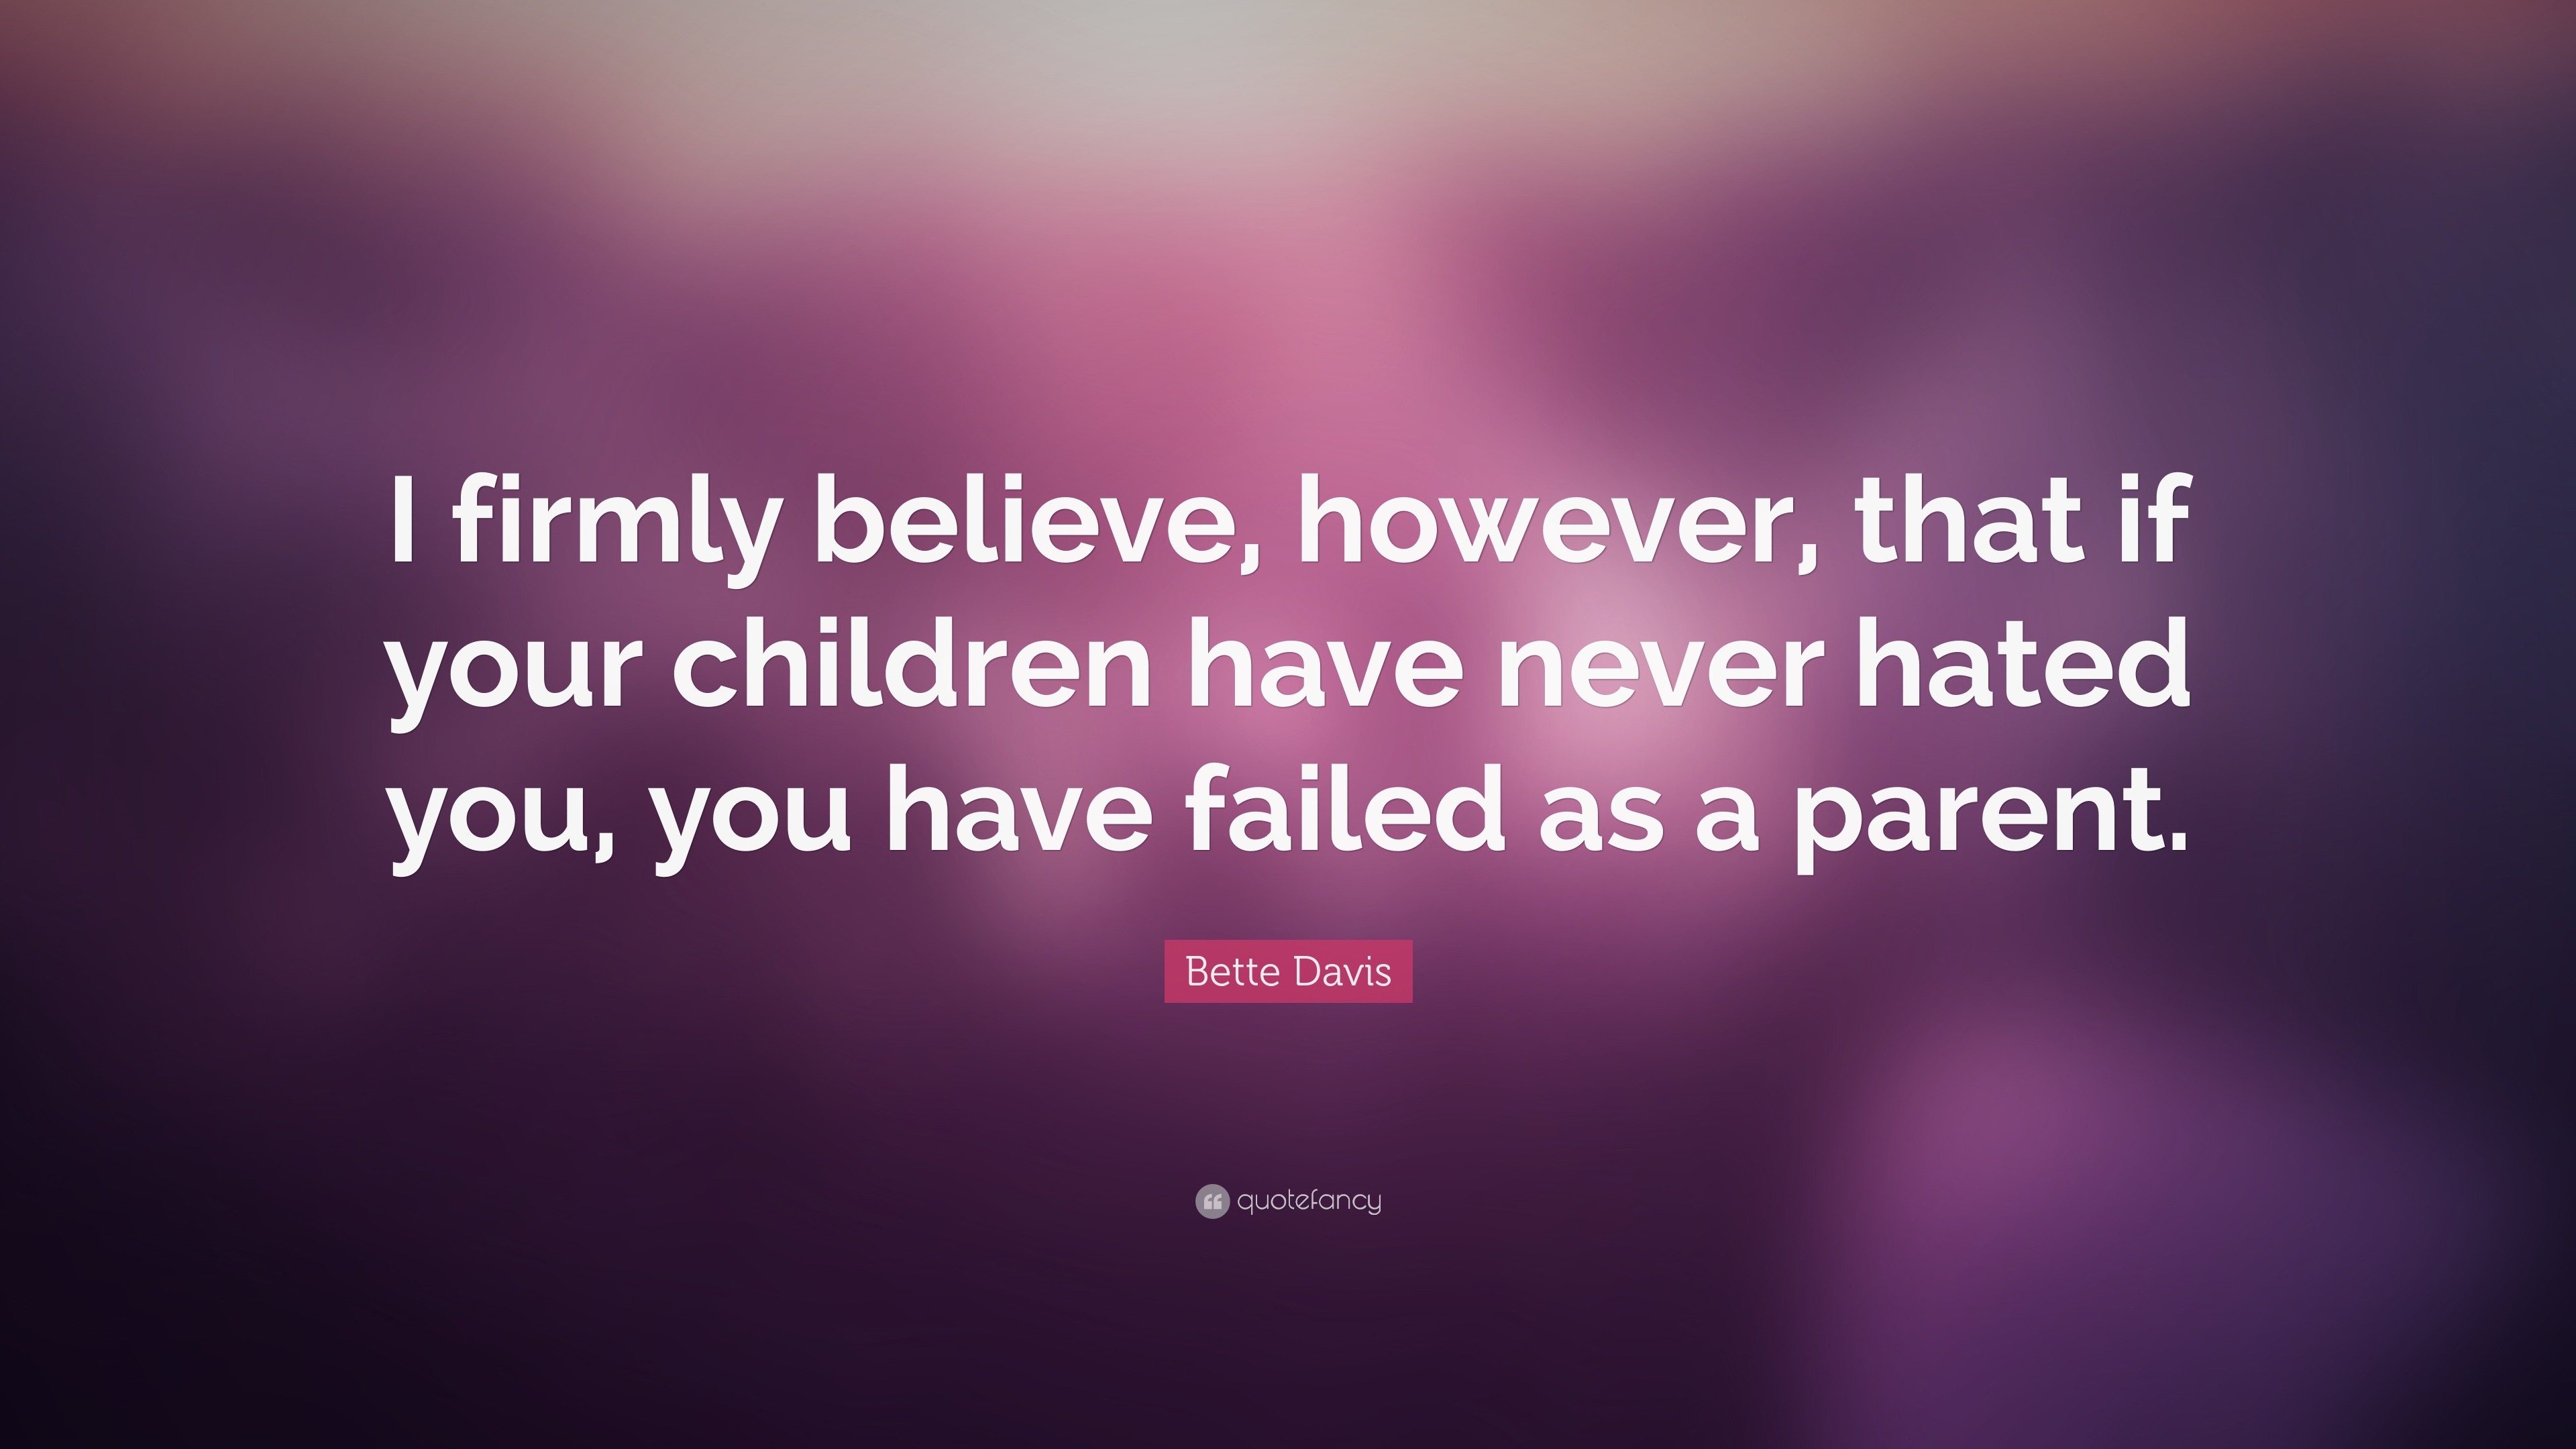 Bette Davis Quote: “I firmly believe, however, that if your children ...